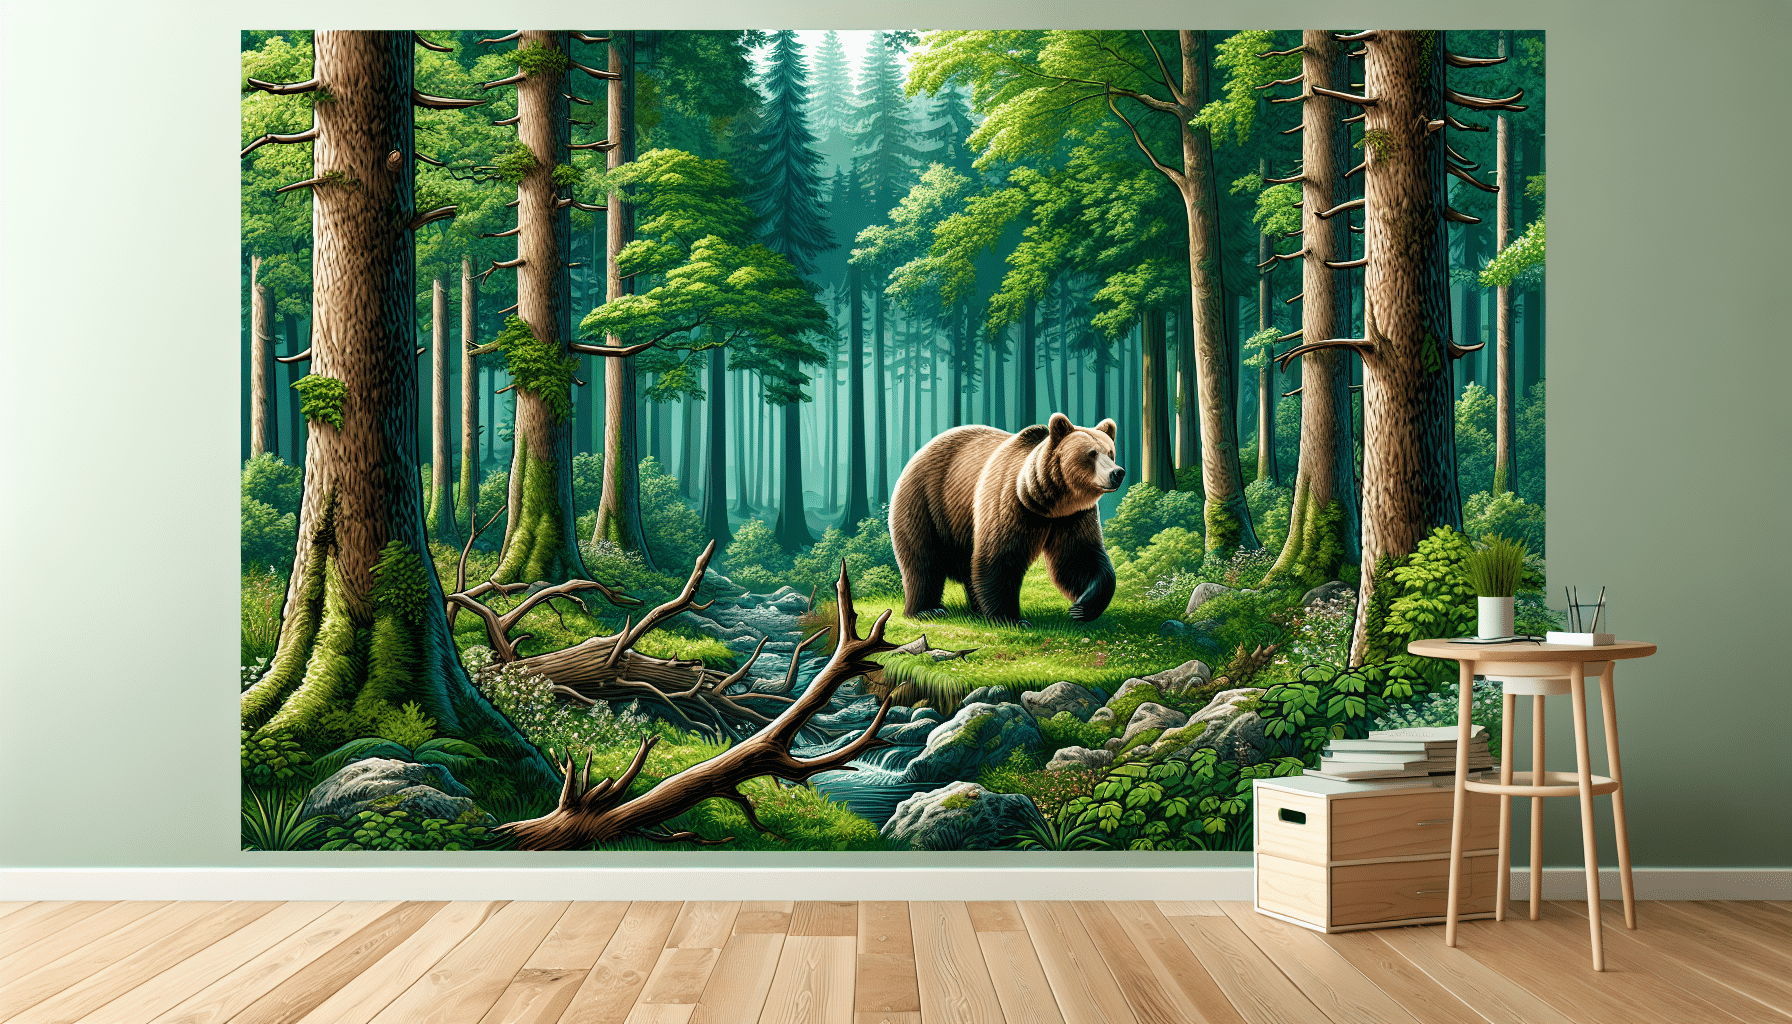 Visualize a scene in the lush, green forest where the brown bears are most active. Depict a frolicking brown bear in the heart of the wilderness during what appears to be the peak of daylight. Surroundings should contain tall trees with thick canopies, and the ground should be teeming with bushes, fallen leaves, and rocks. Make sure the entire scene is free of humans, text, brand logos, and items displaying any kind of text.